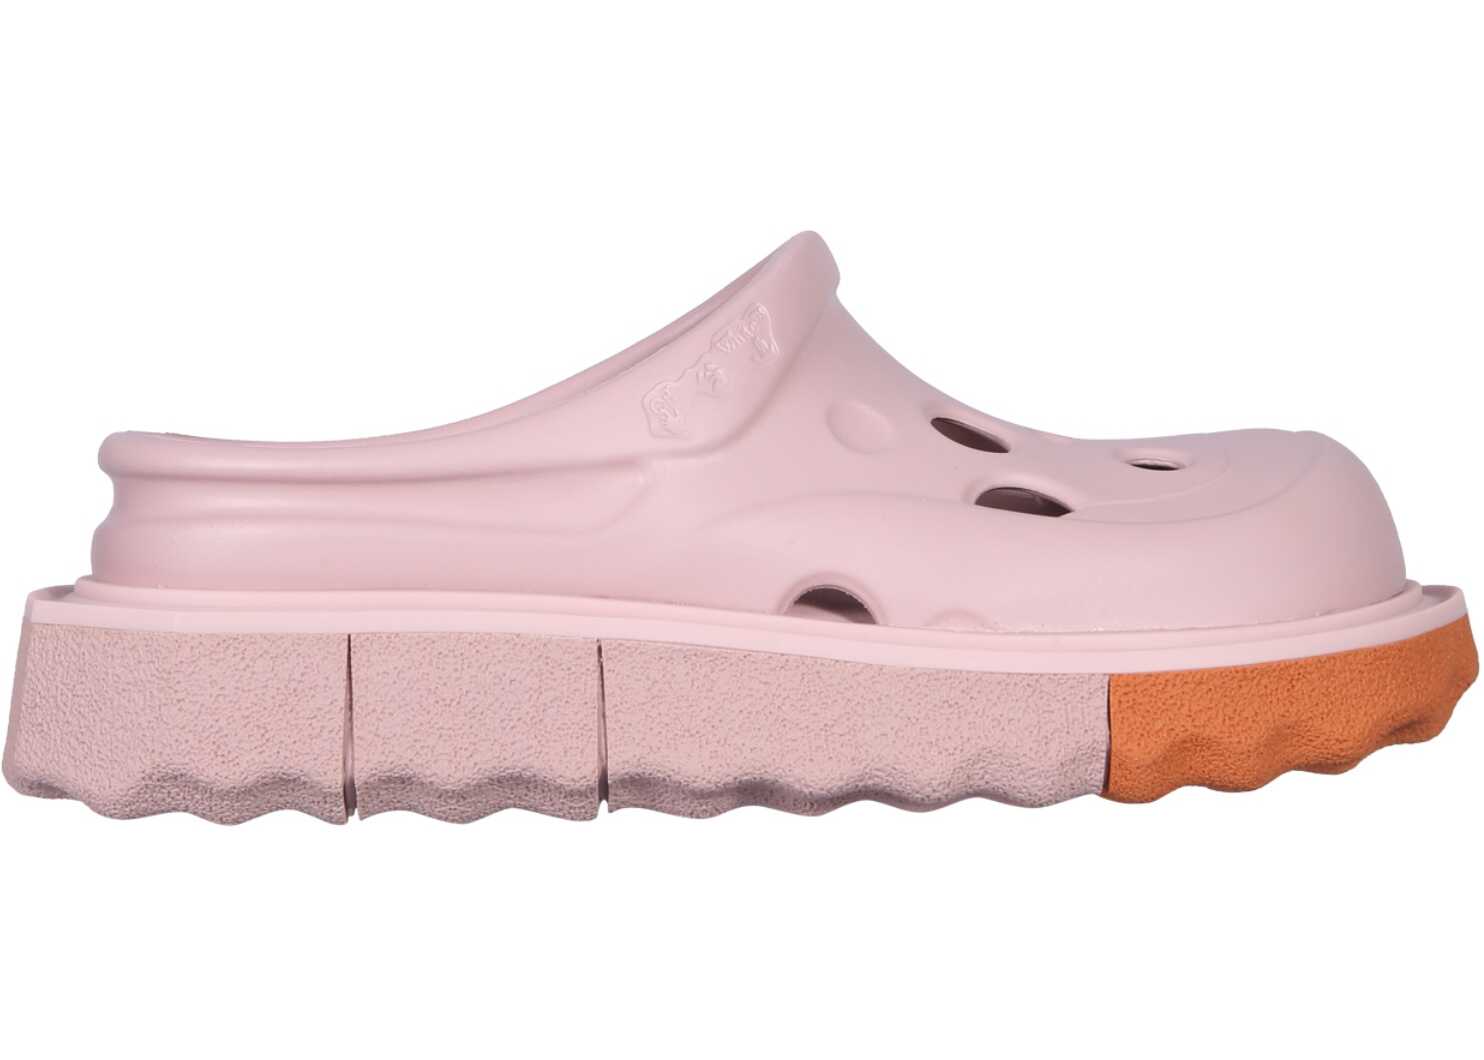 Off-White “Meteor” Sandals PINK b-mall.ro